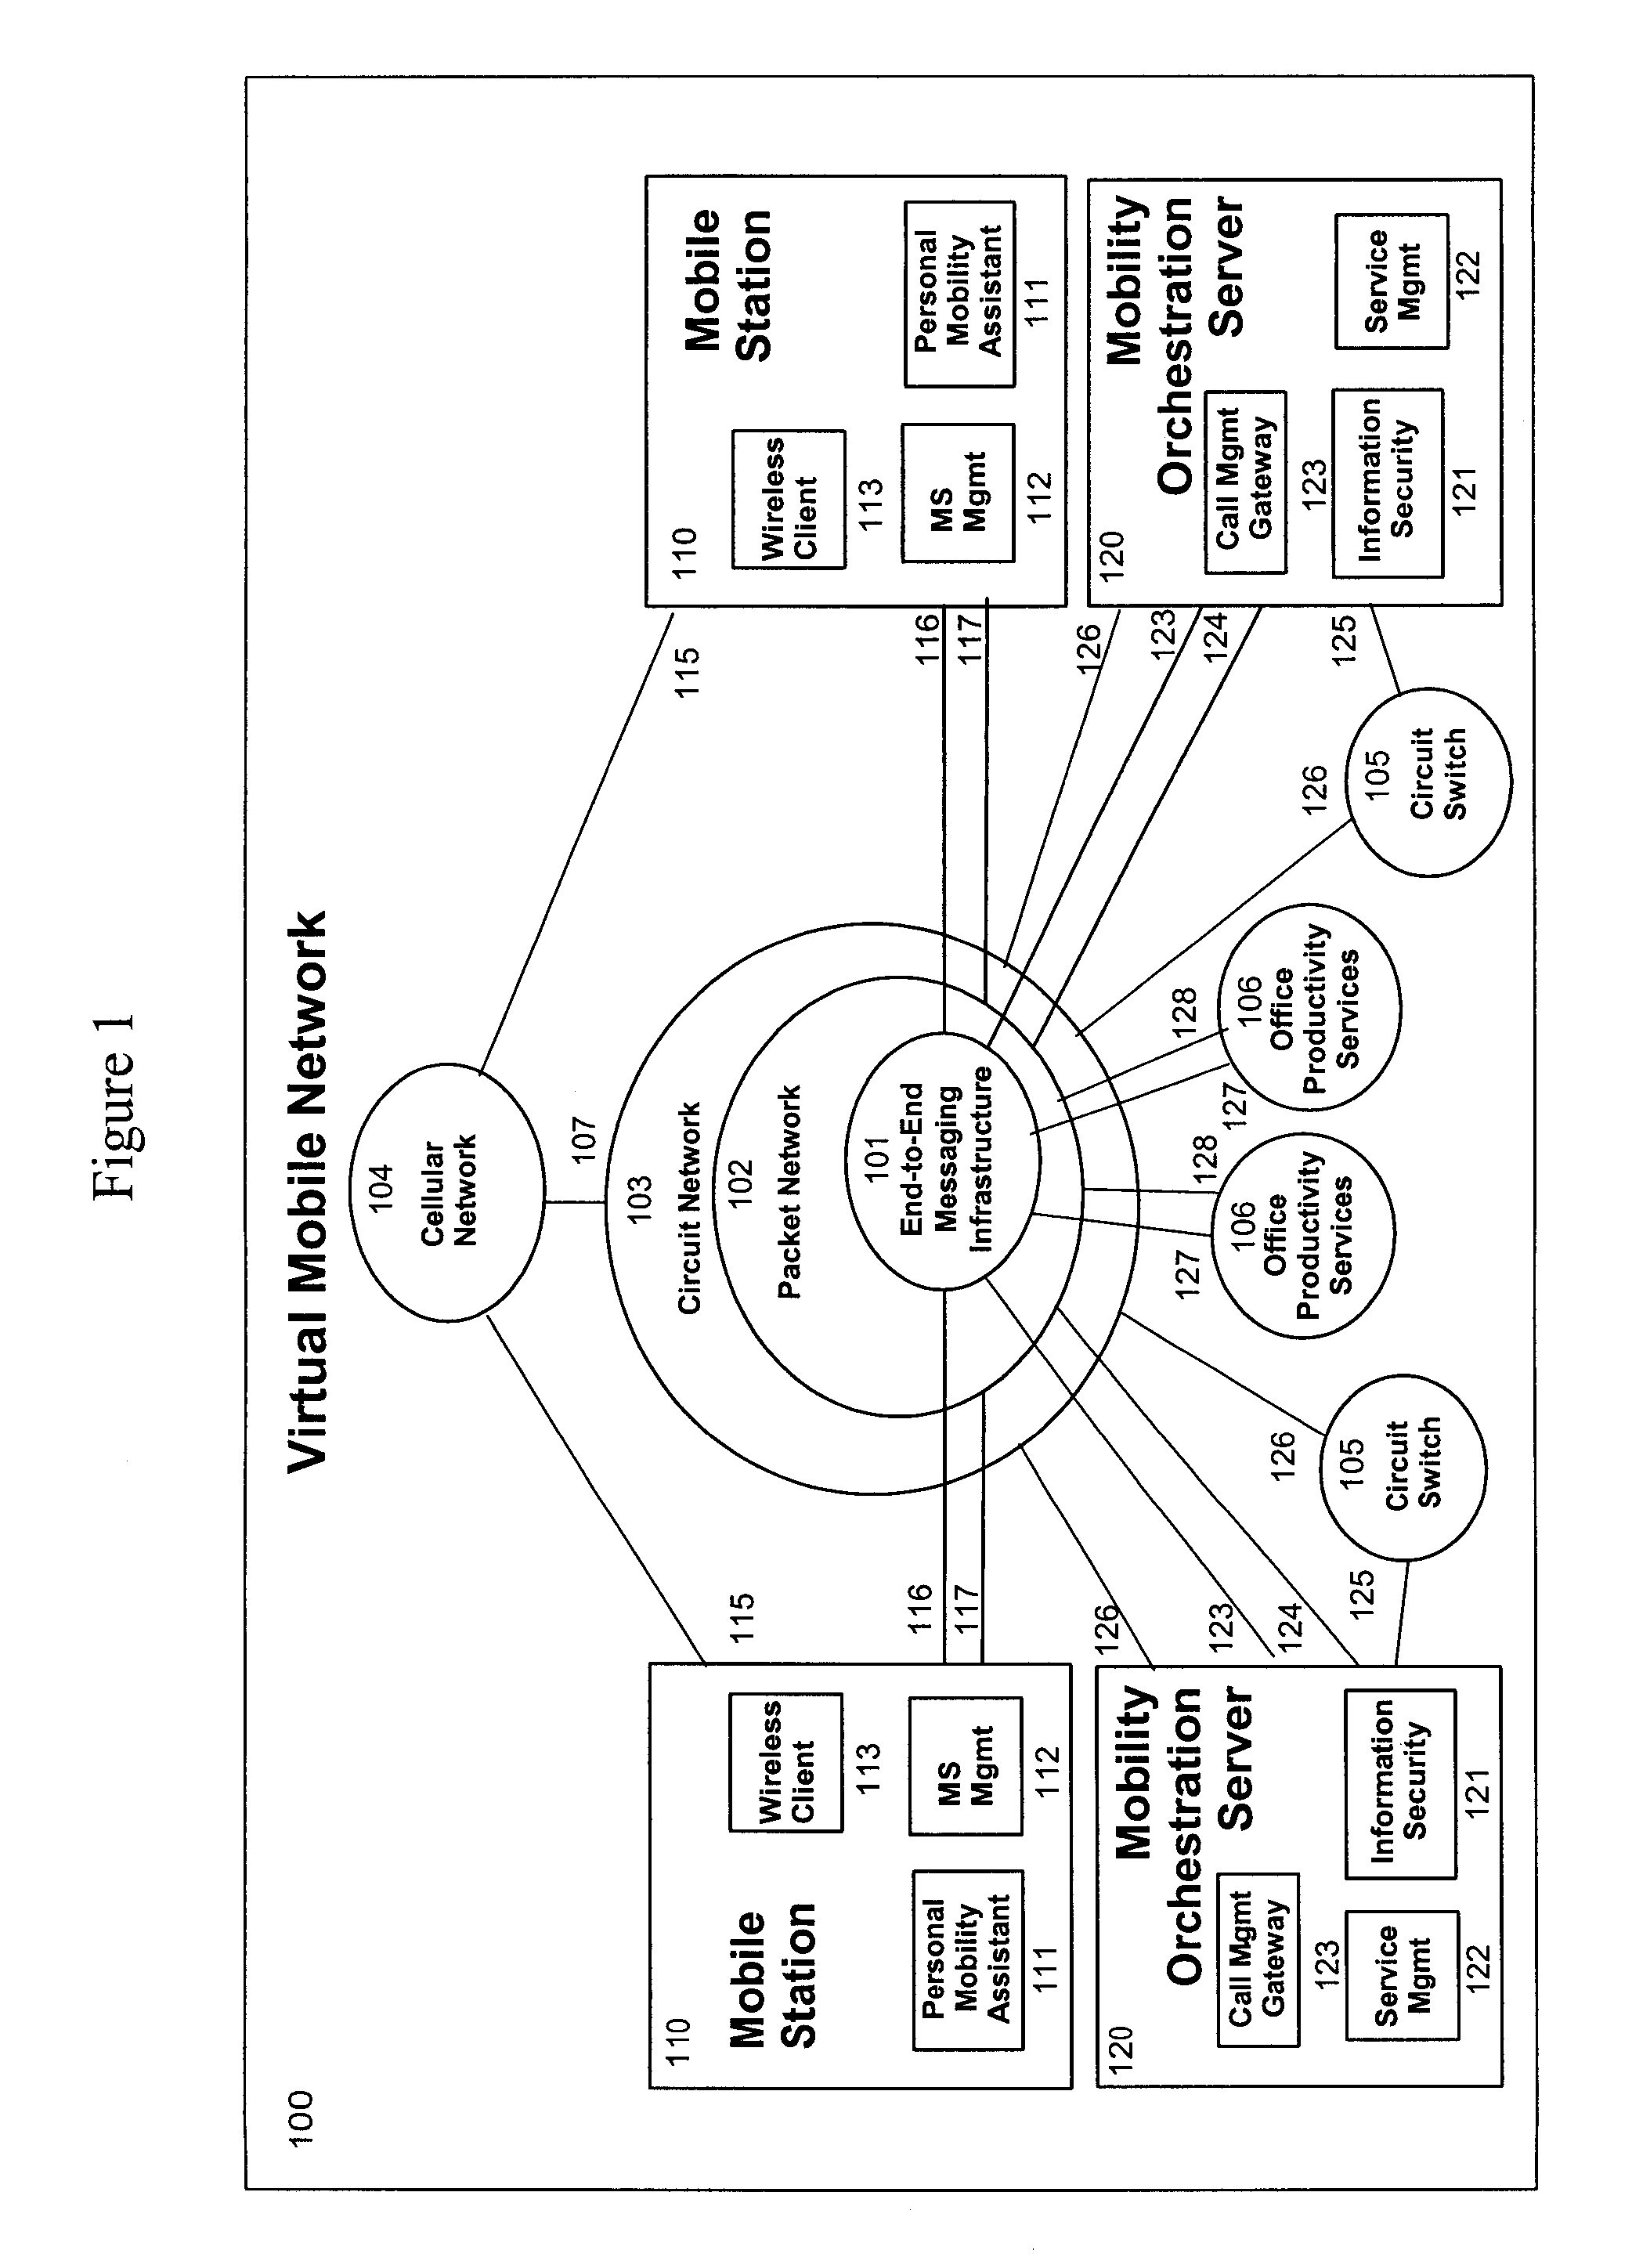 System And Method For A Virtual Mobile Network